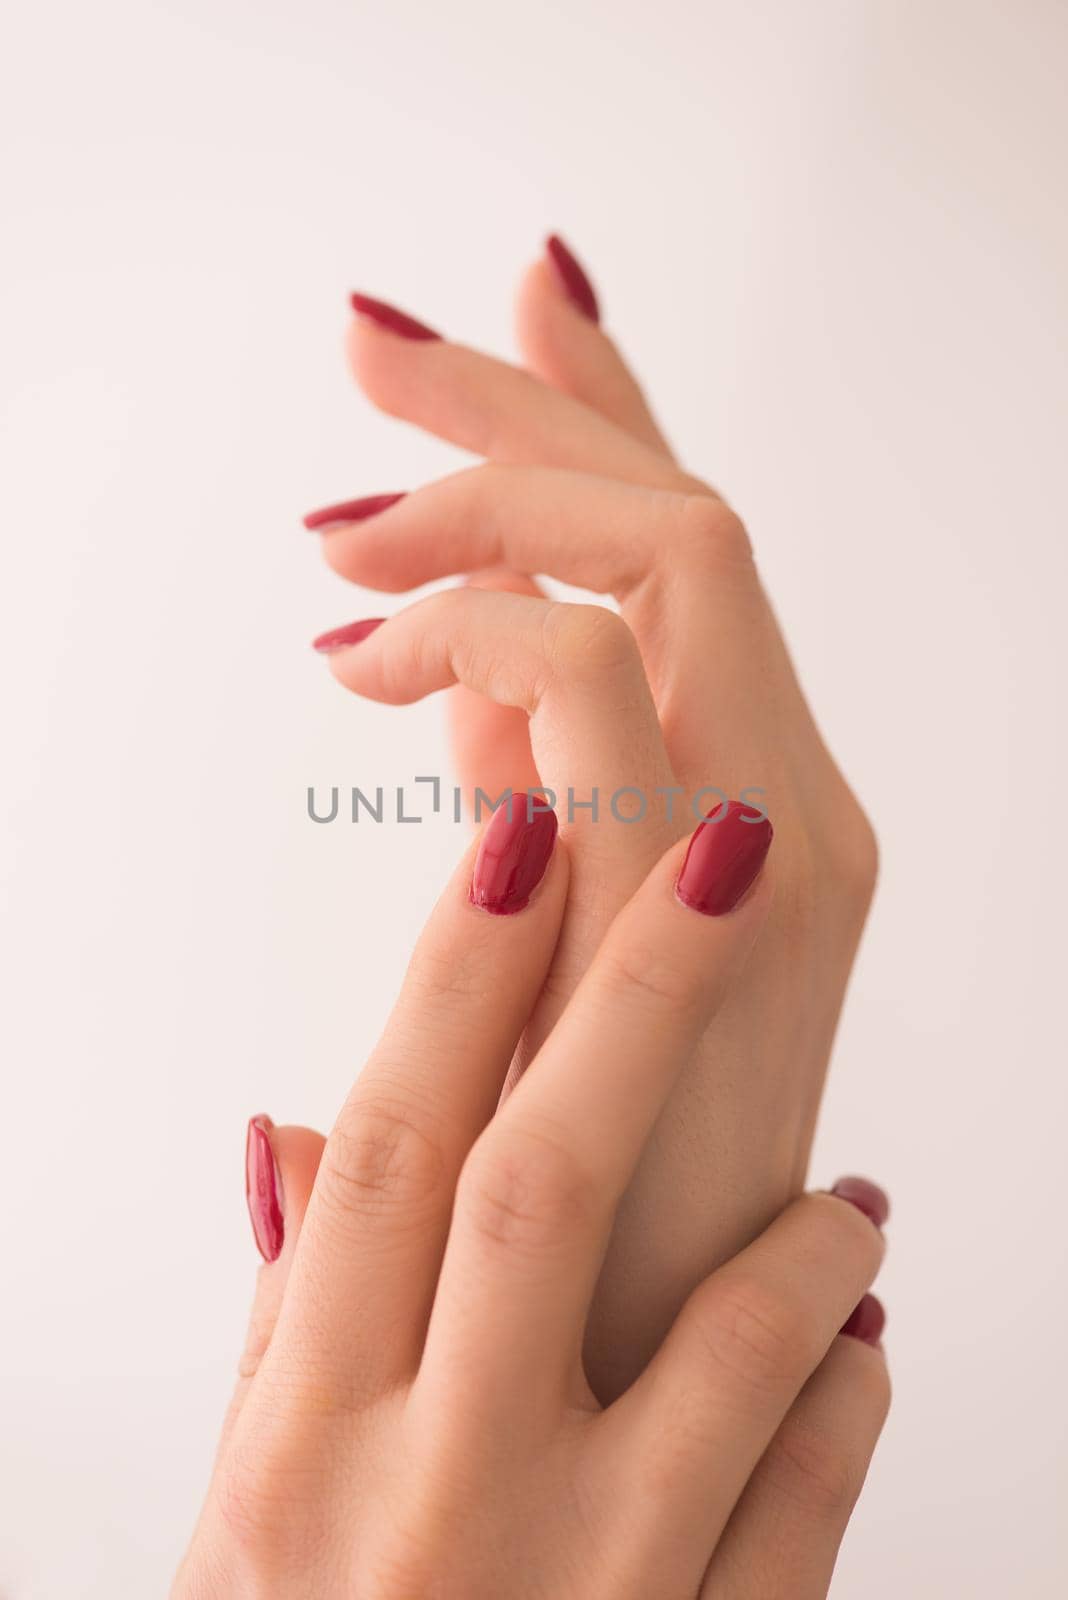 closeup of hands of a young woman with long red manicure on nails against white background